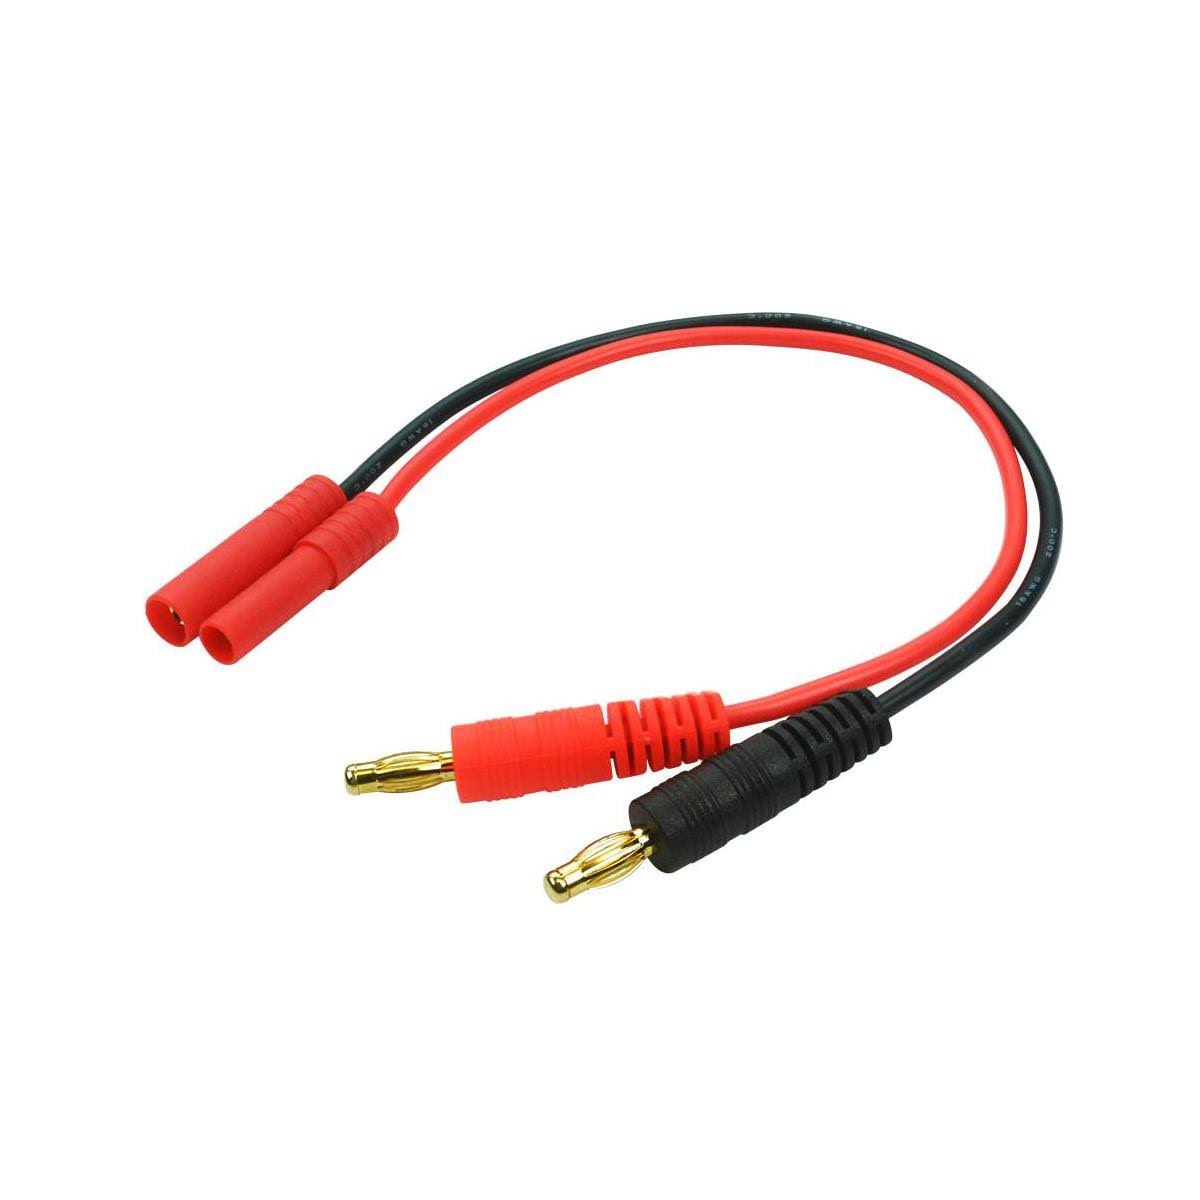 Common Sense RC HXT 4mm Charging Adapter with Banana Plugs #BP2HXT4M